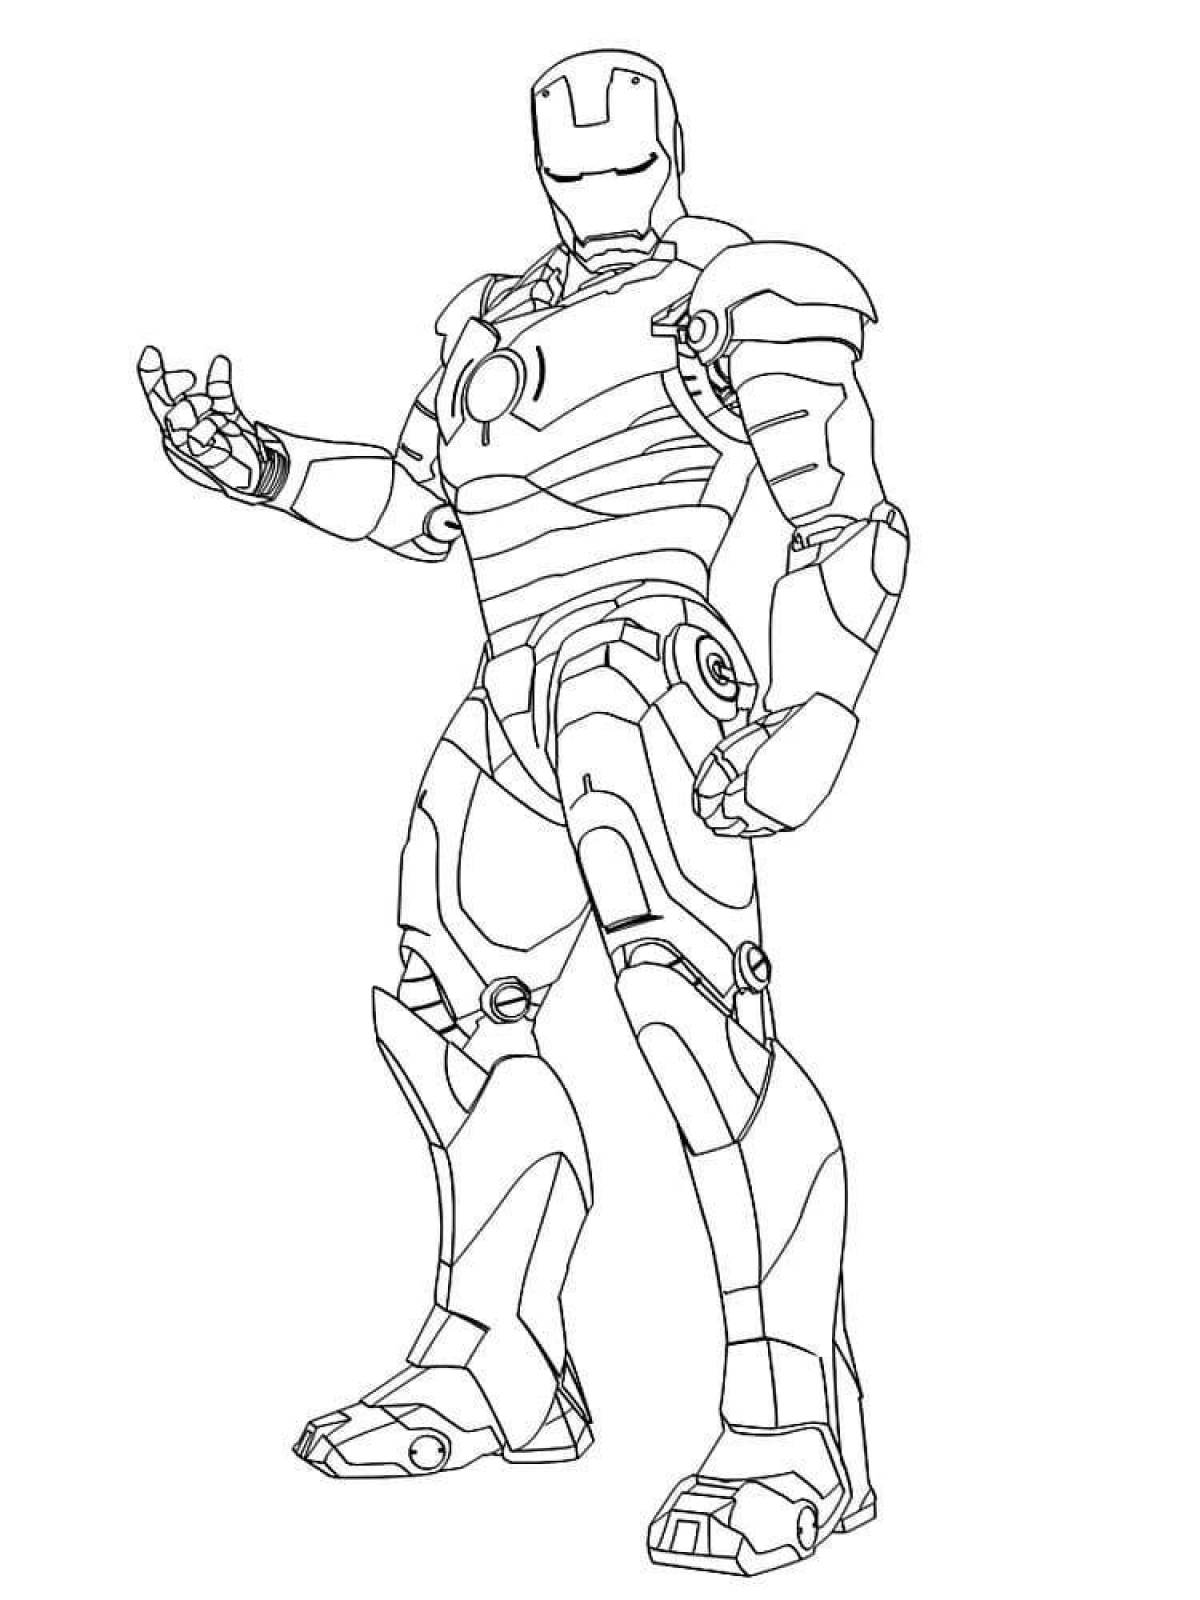 Cute iron man coloring book for kids